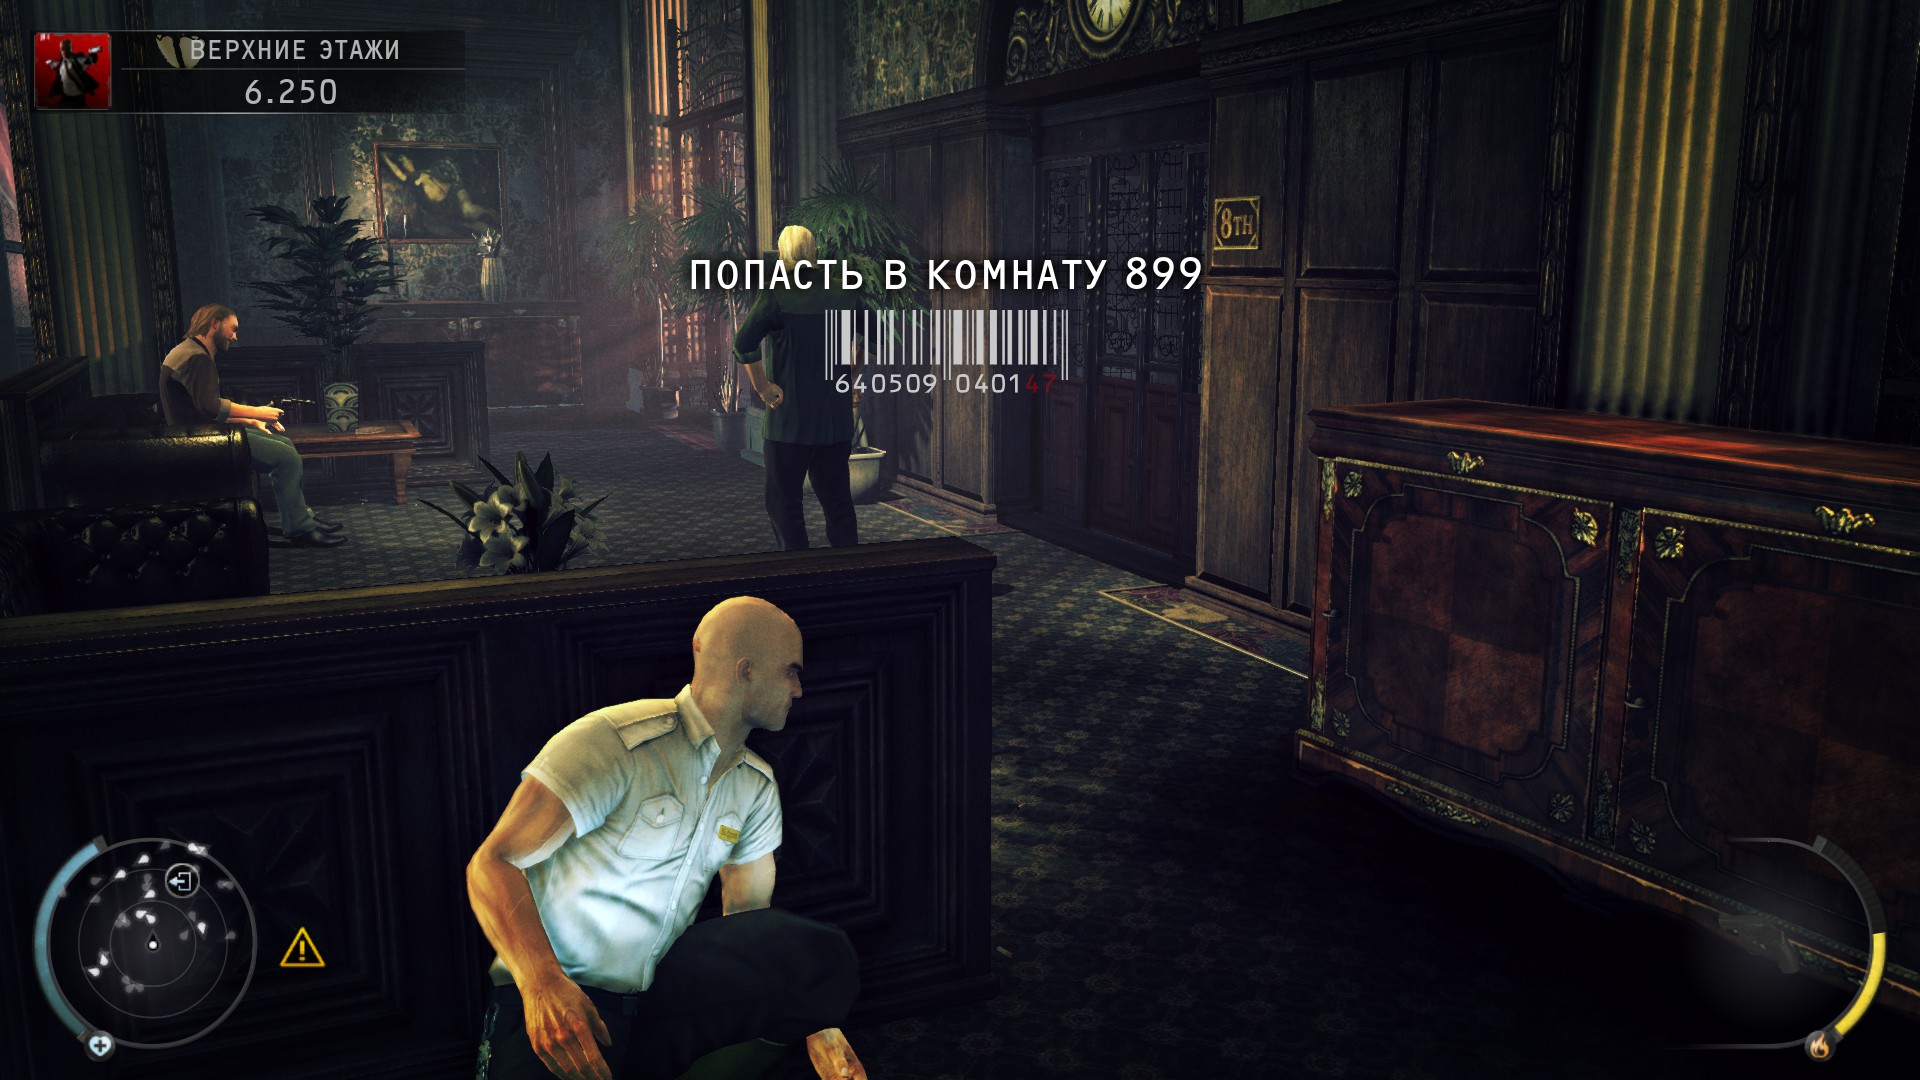 hitman absolution 2 download